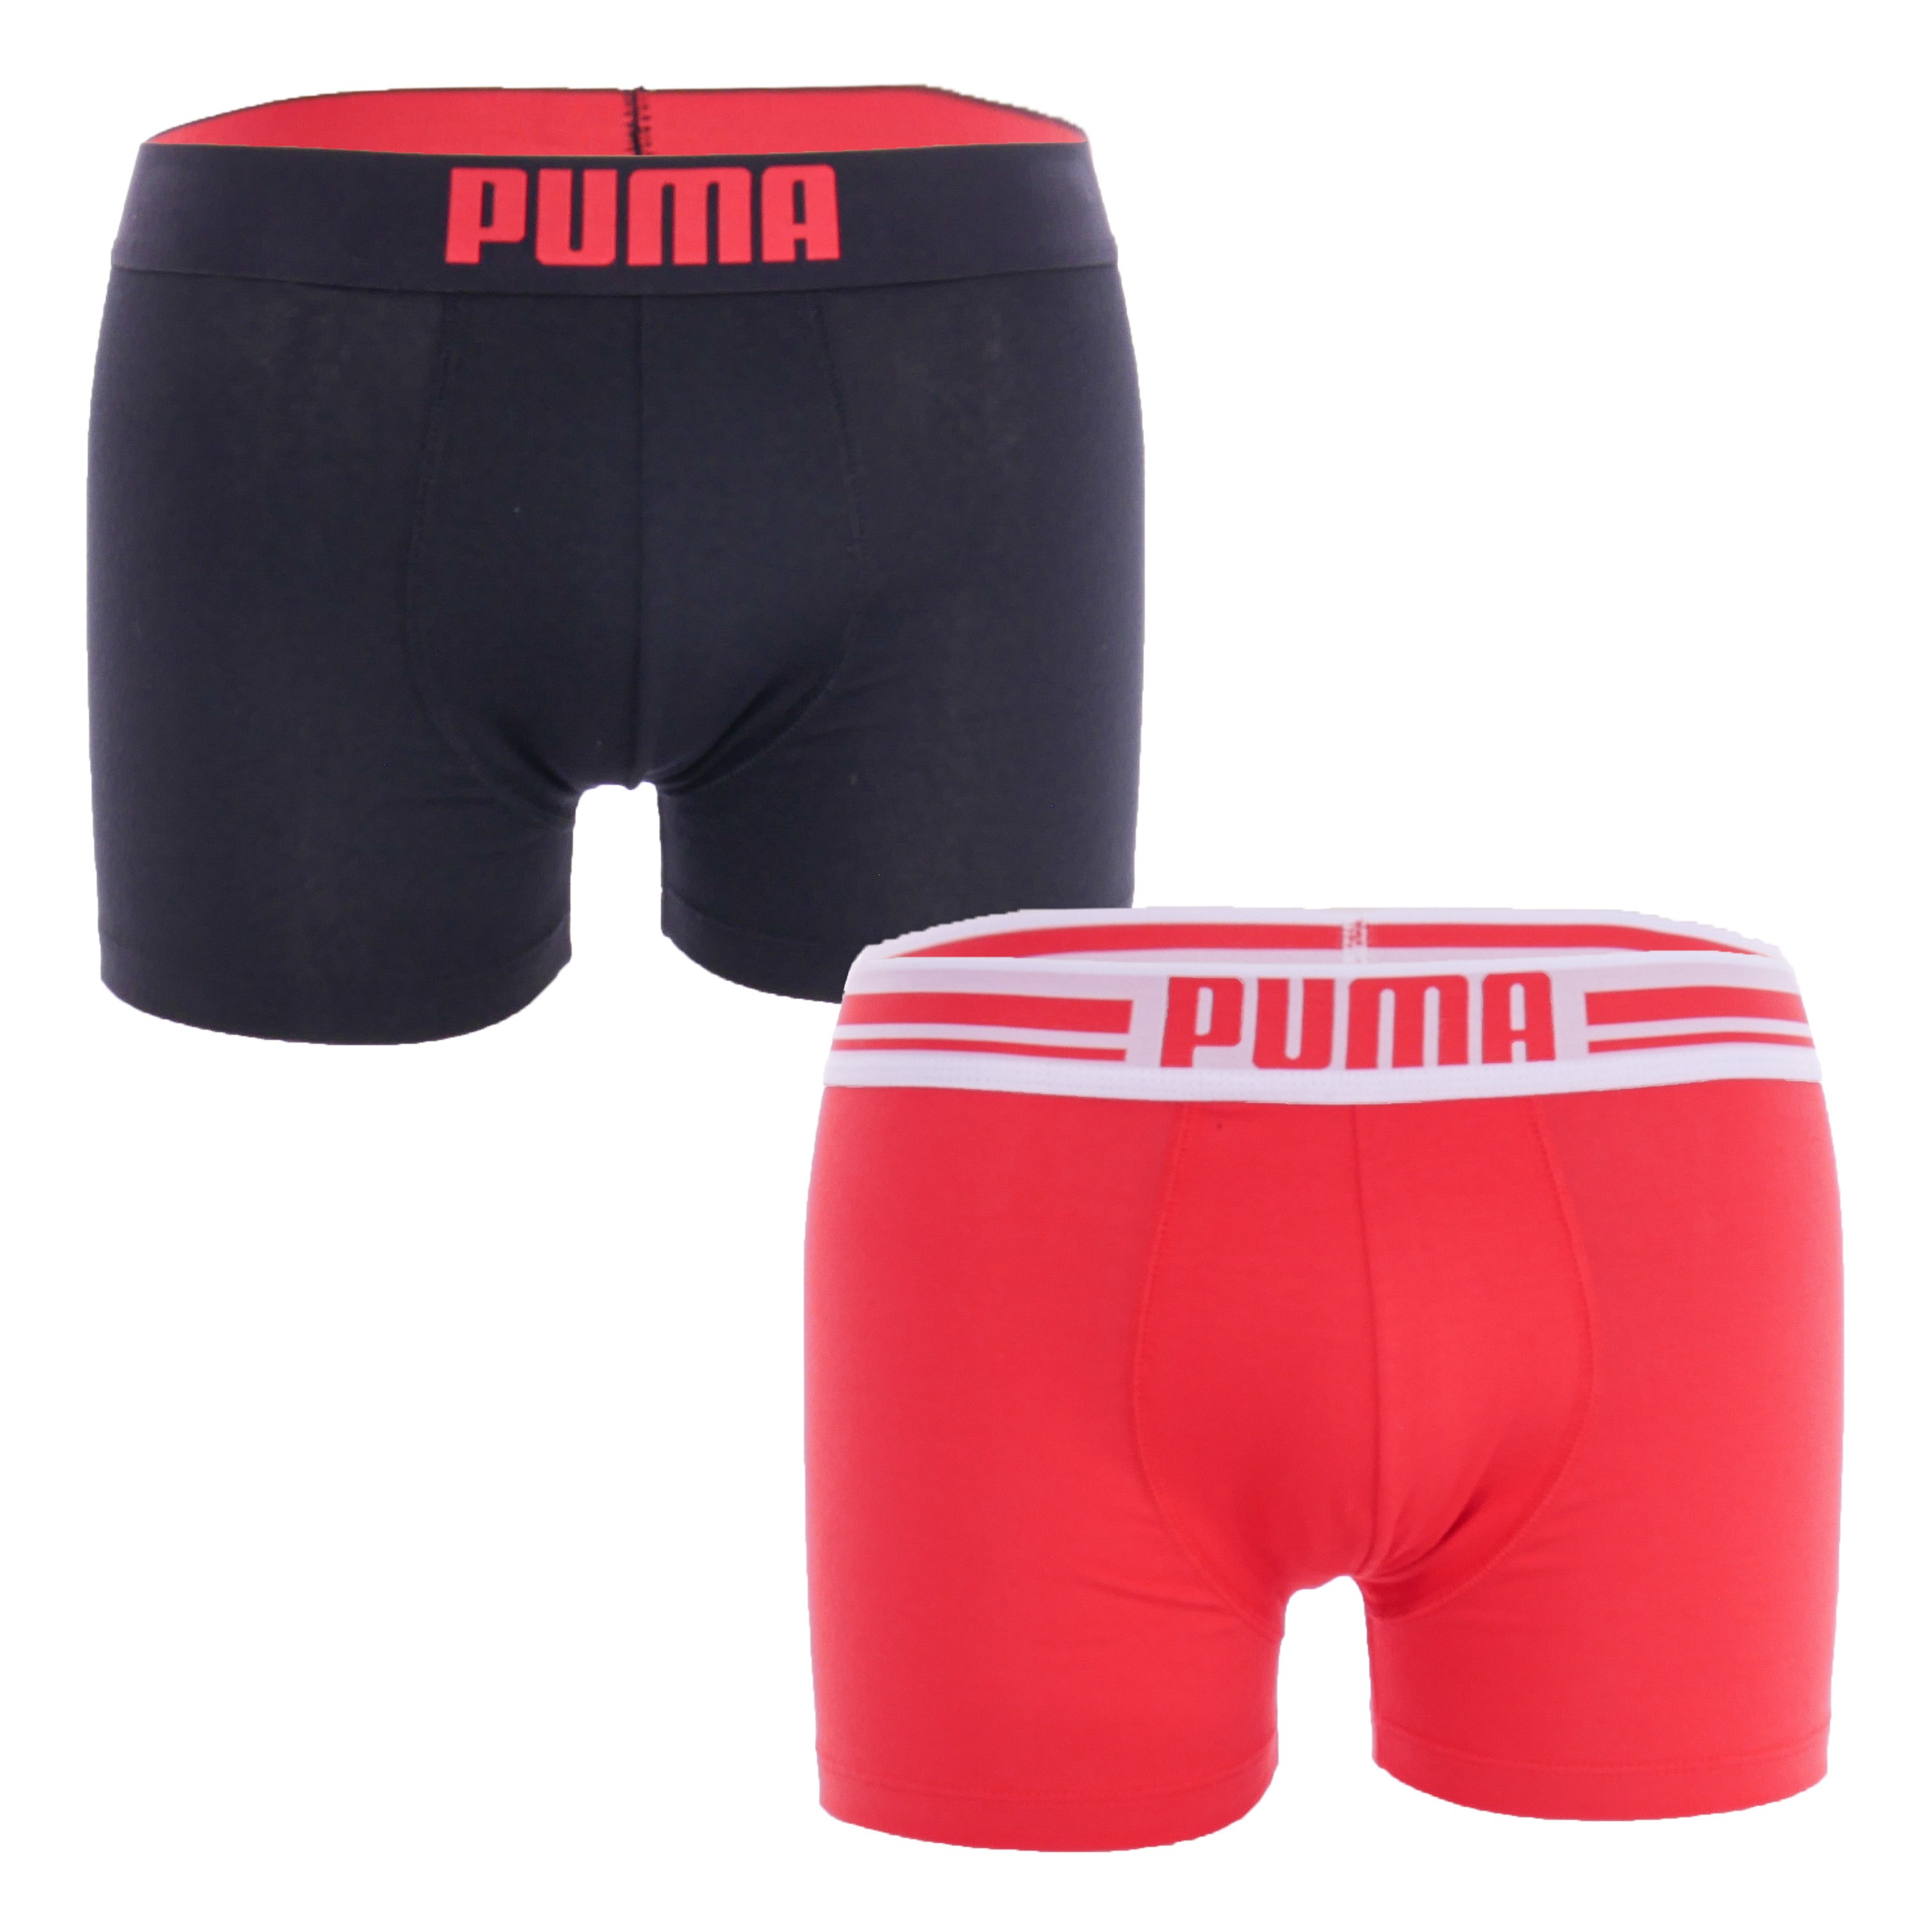 Set of 2 boxers with PUMA logo - red and black: Packs for man brand